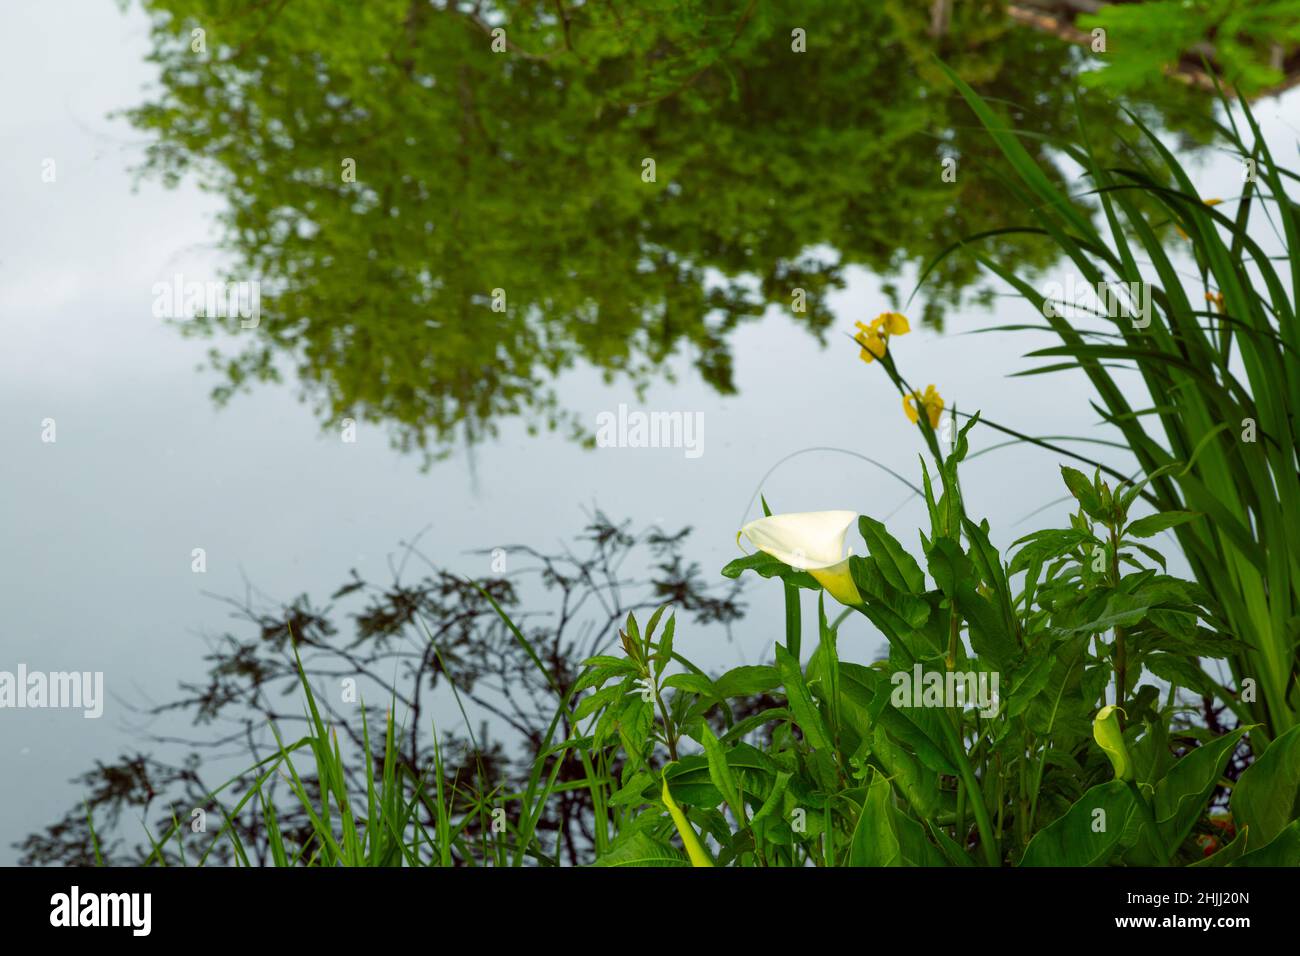 A lily looking out over a still reflective body of water Stock Photo